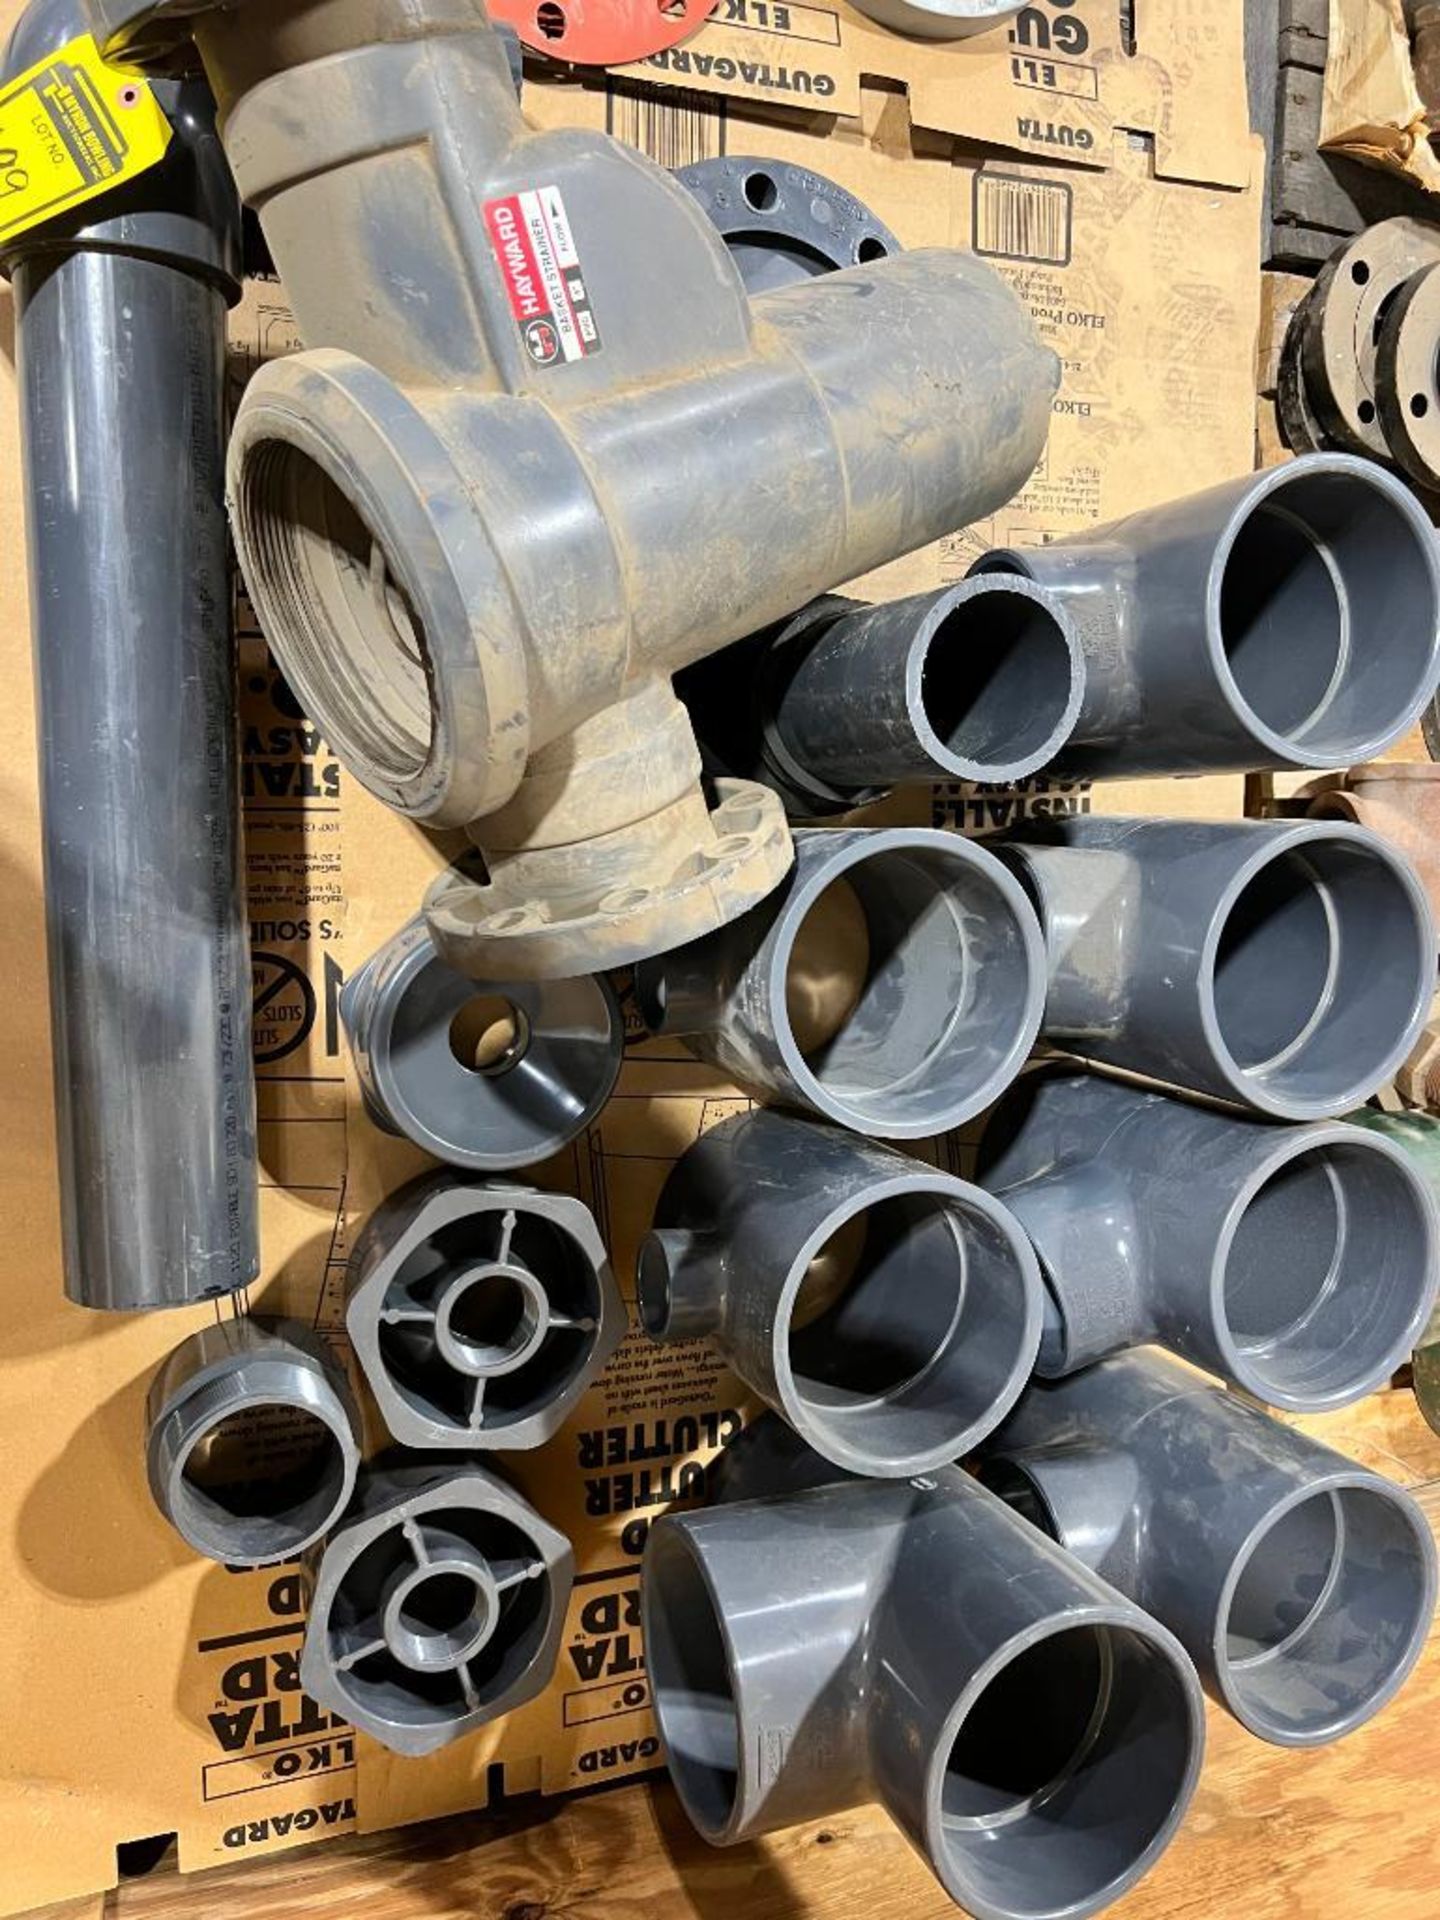 SKID OF ASSORTED PVC FITTINGS